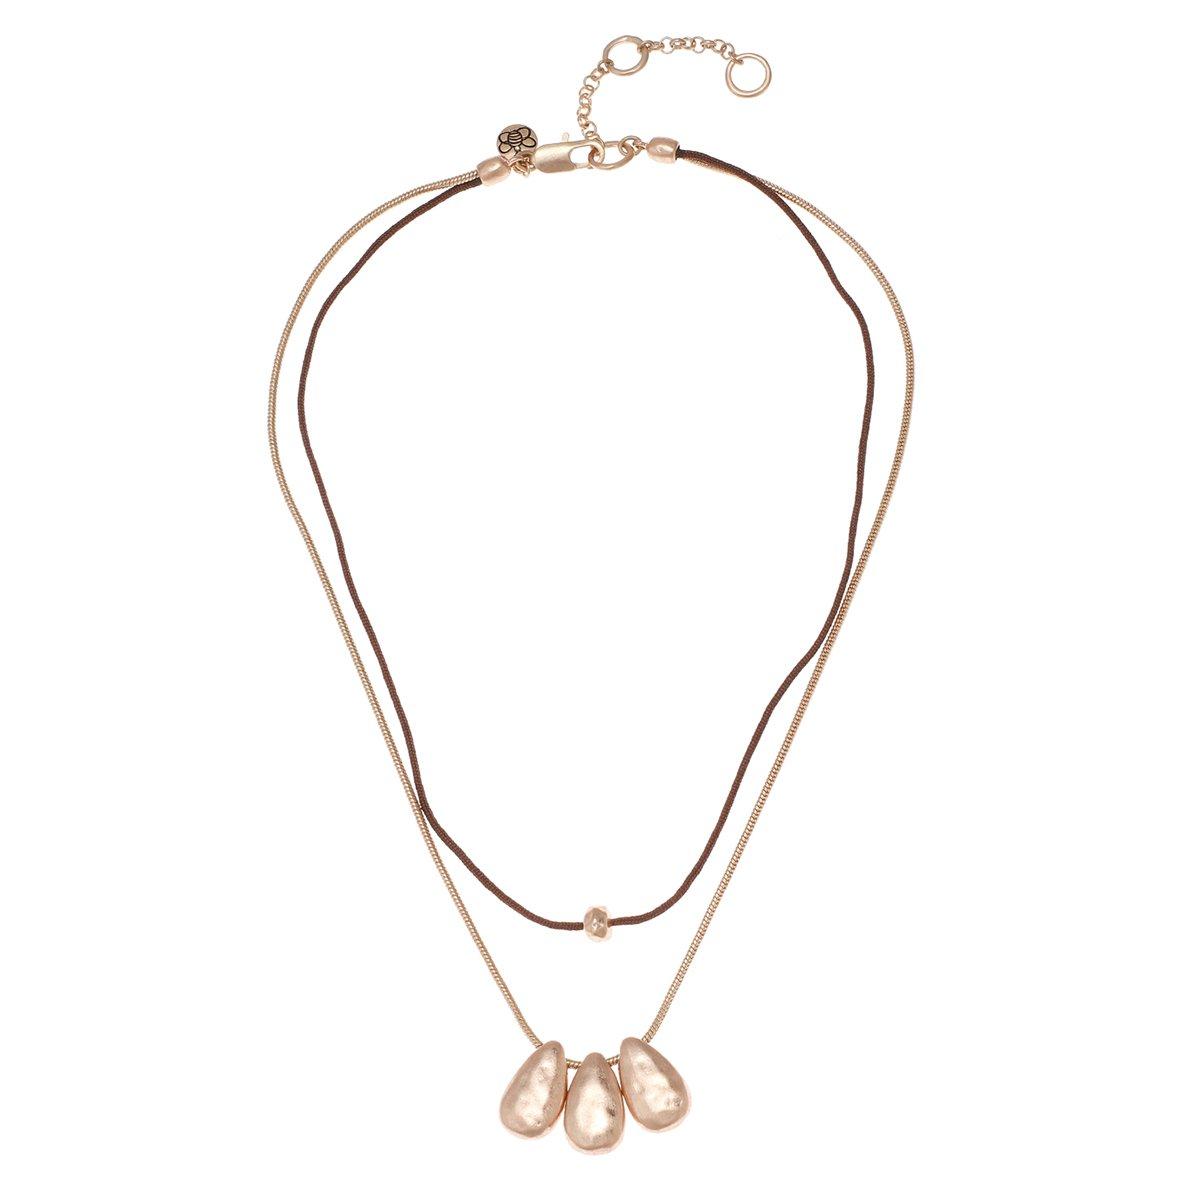 2-Row Disc Chain & Cord Necklace